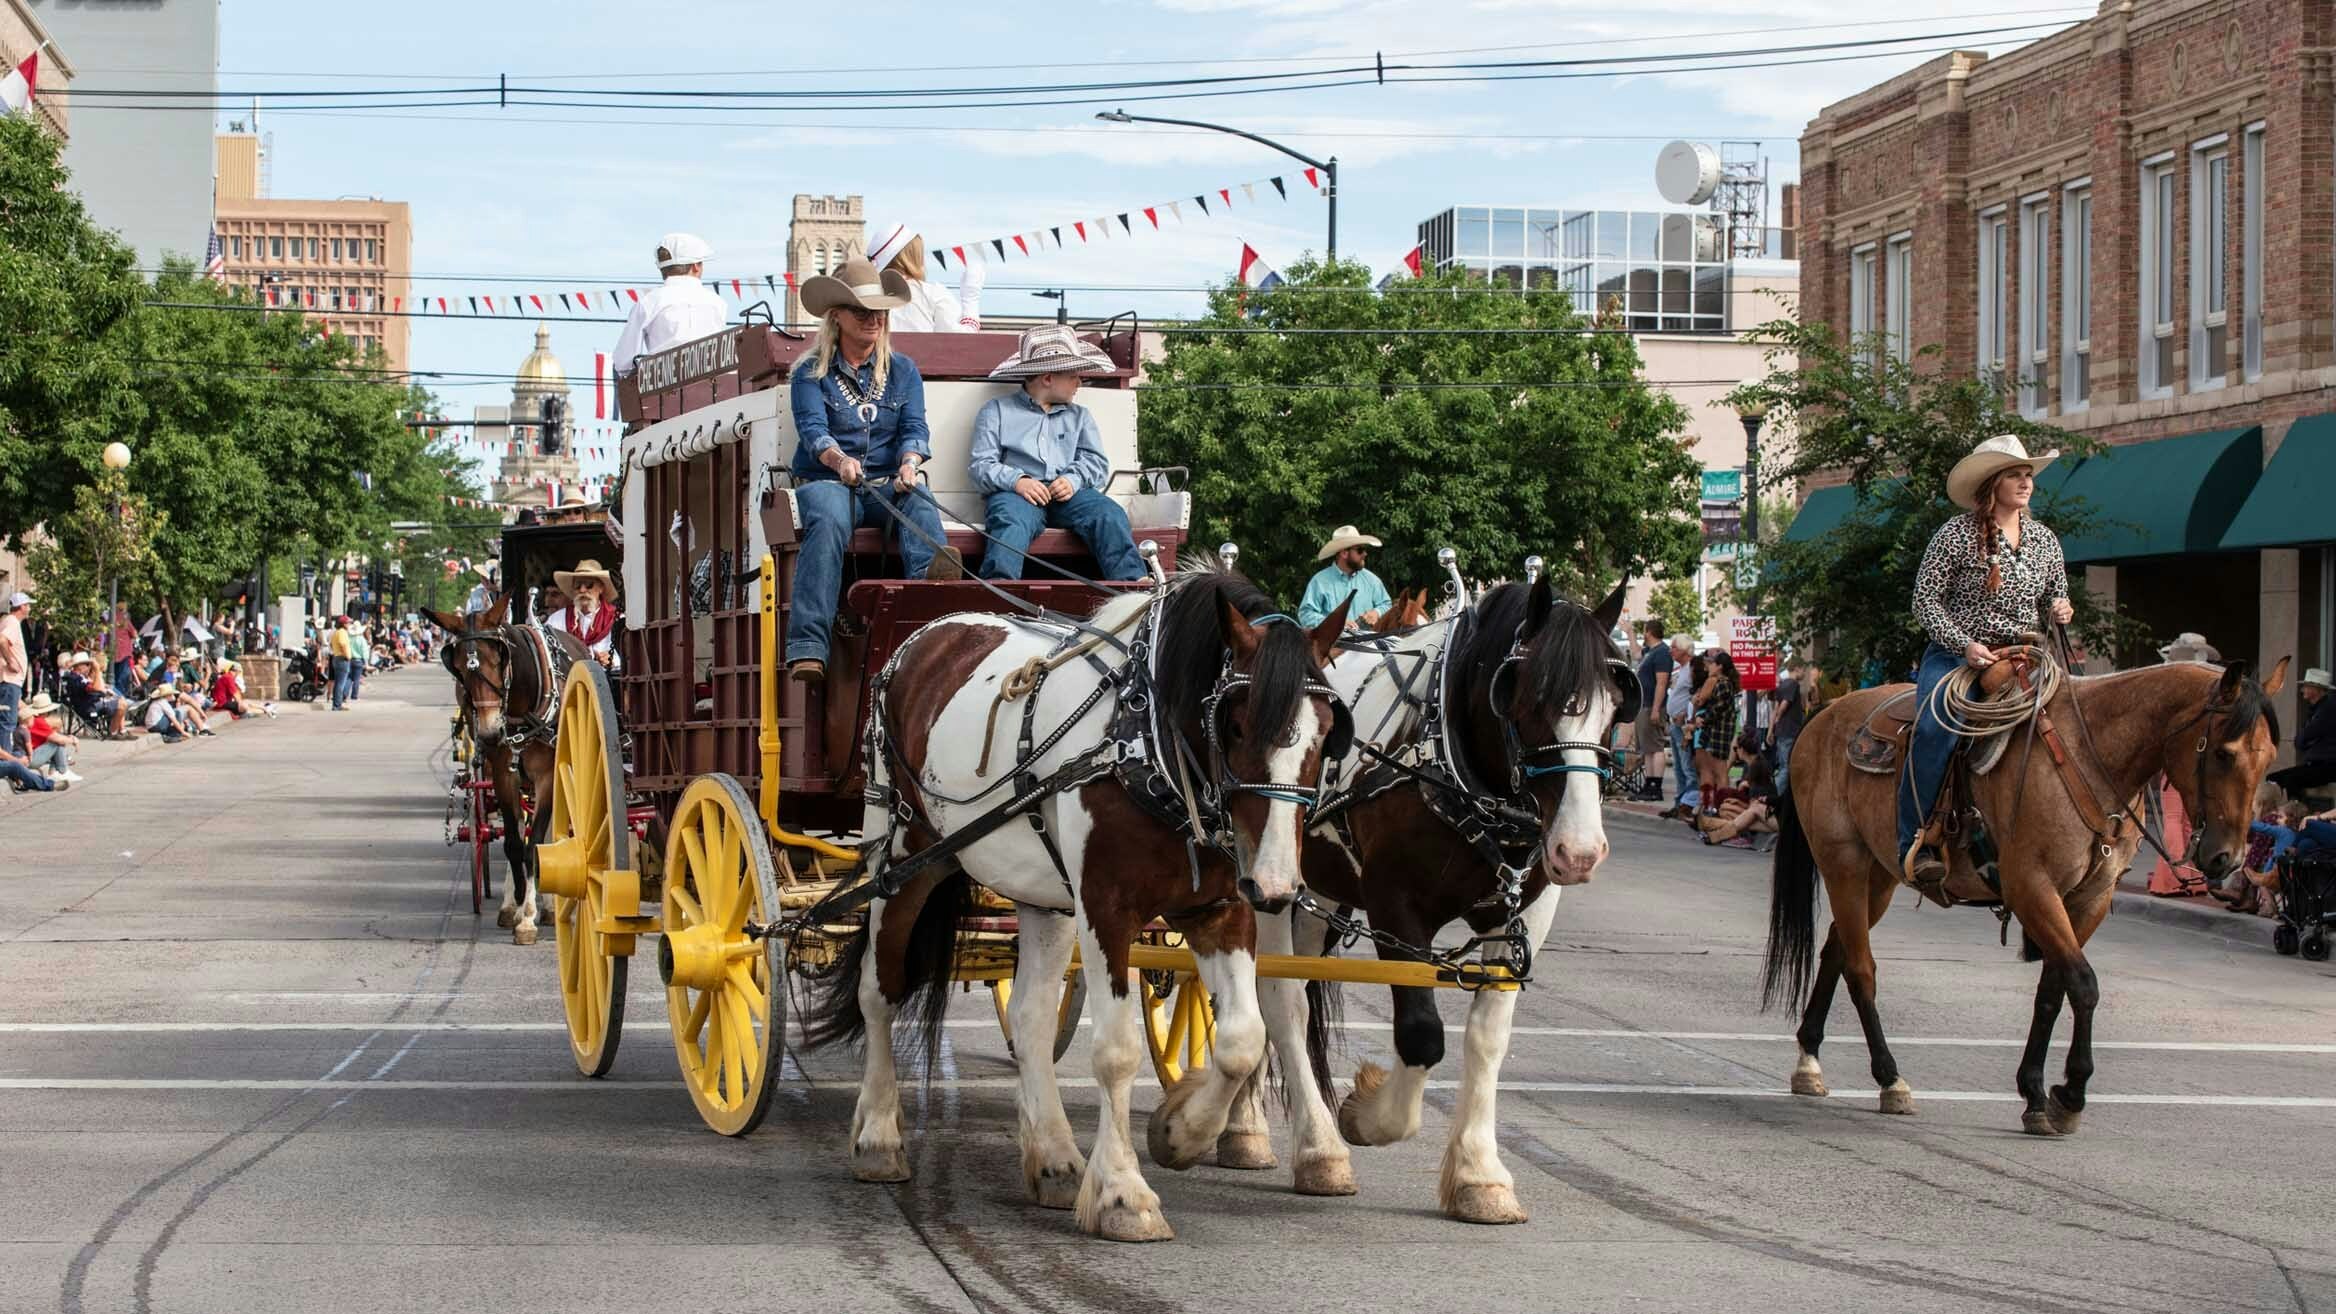 The second Grand Parade of 4 parades at Cheyenne Frontier Days on July 25, 2023.